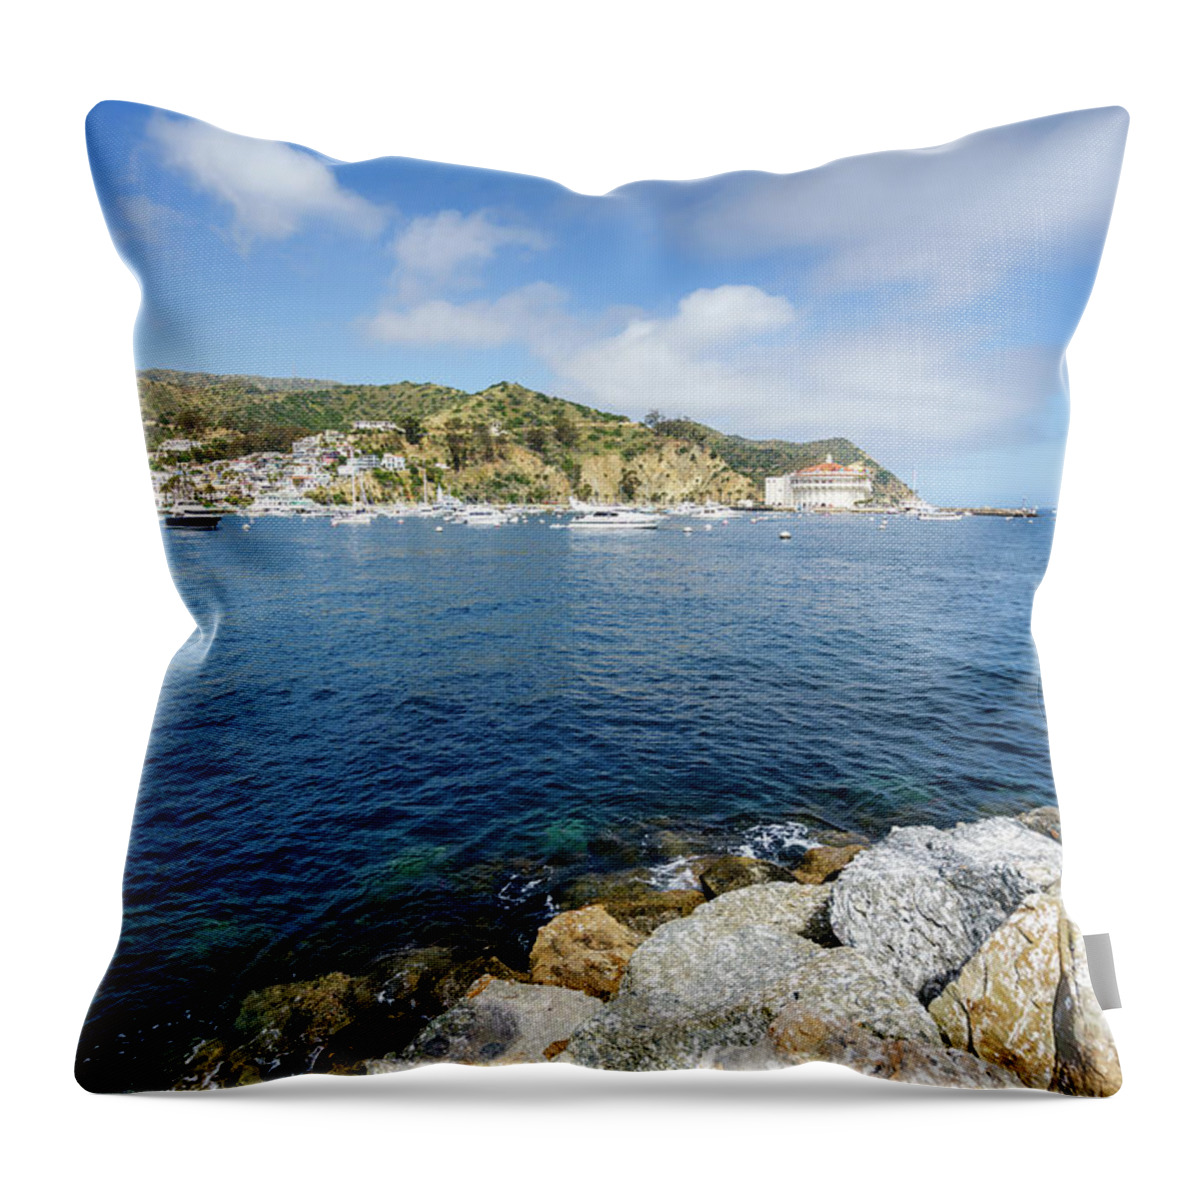 America Throw Pillow featuring the photograph Catalina Island Avalon Harbor Photo by Paul Velgos